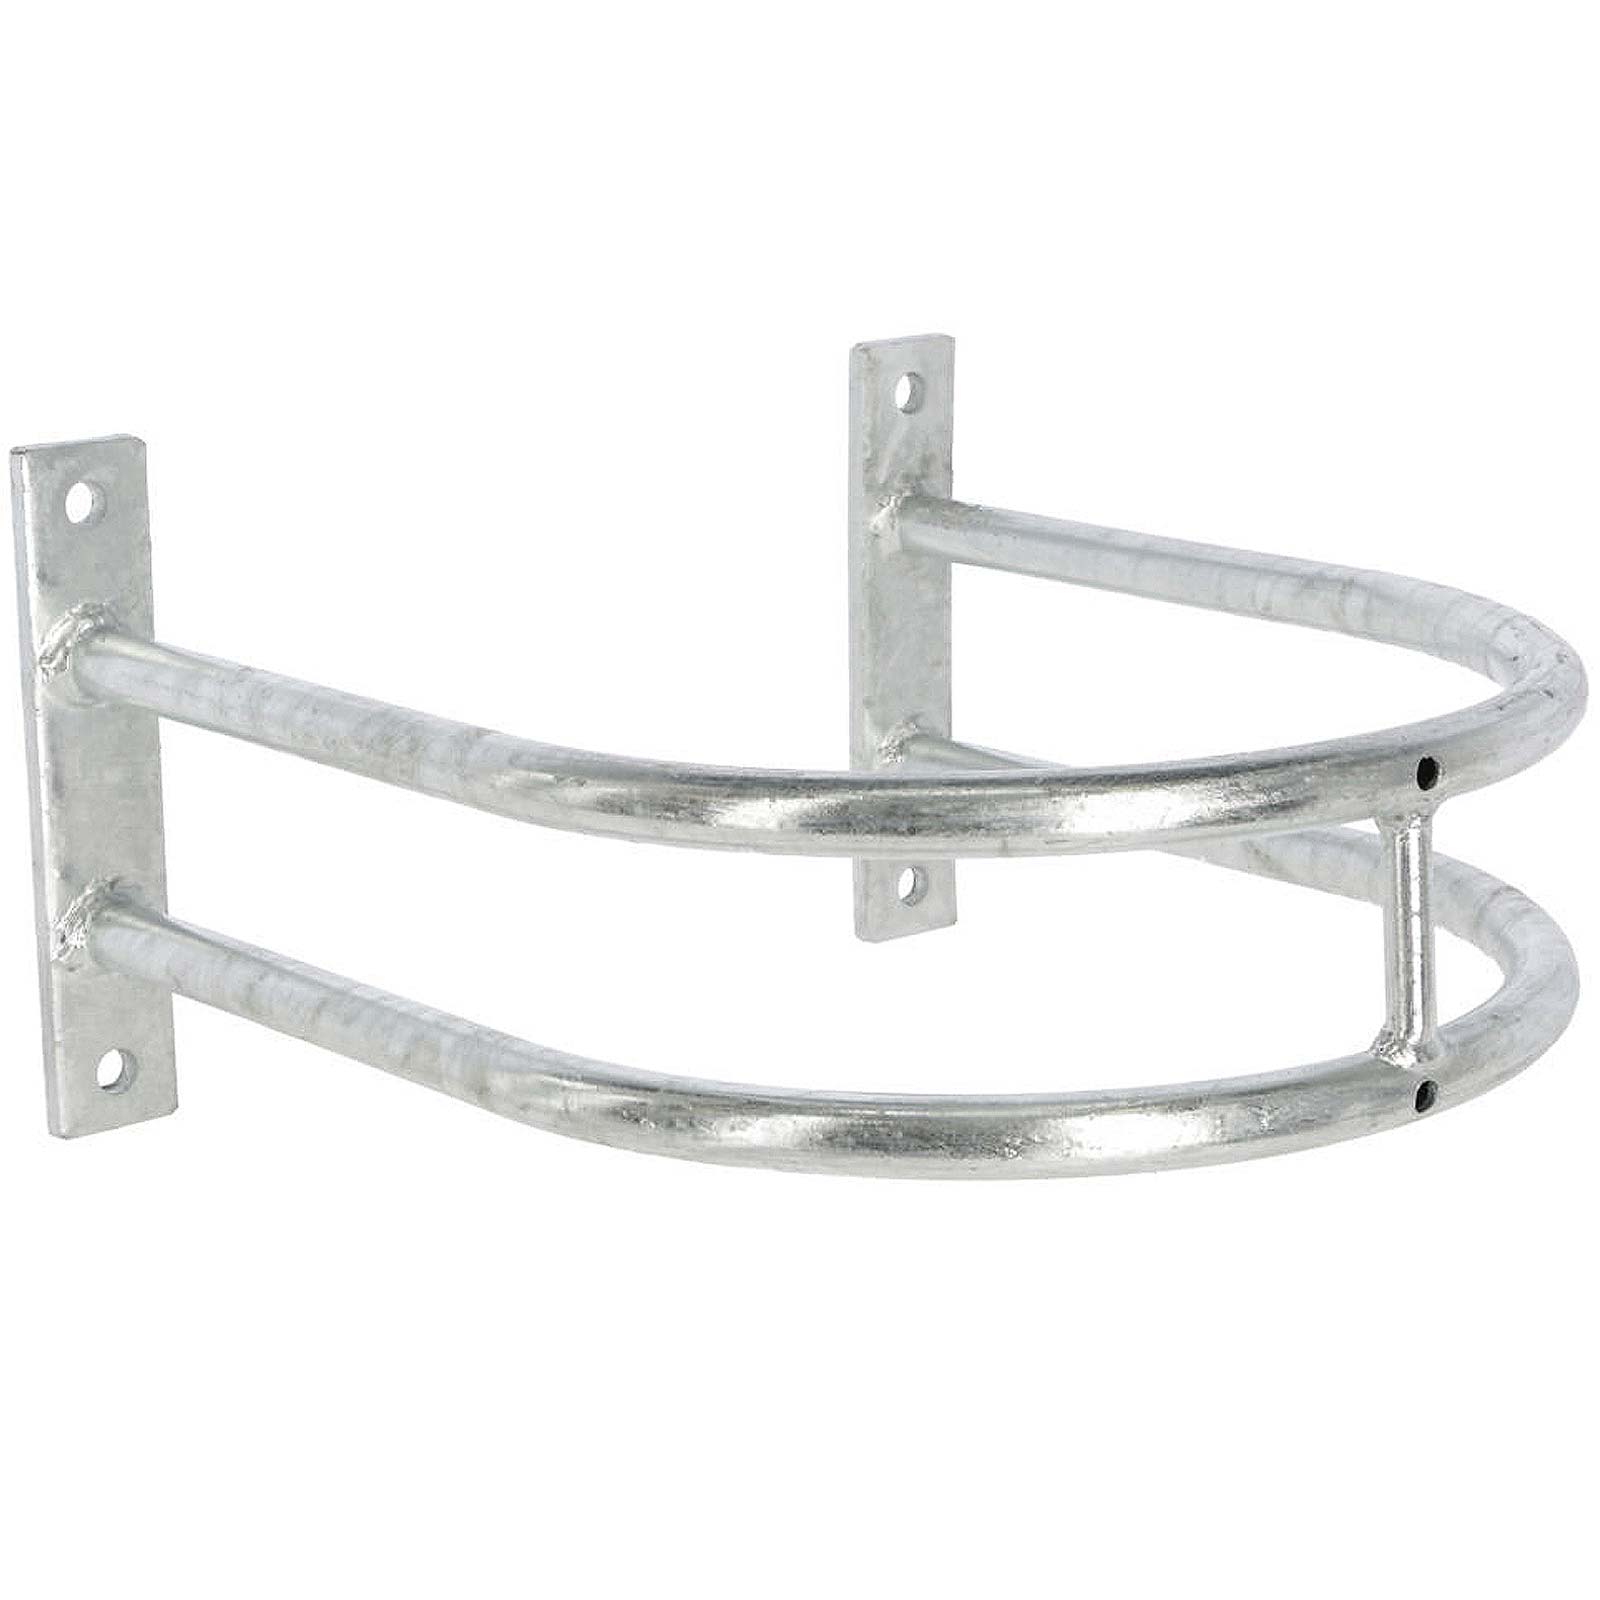 Protection Bracket for Water Bowls M